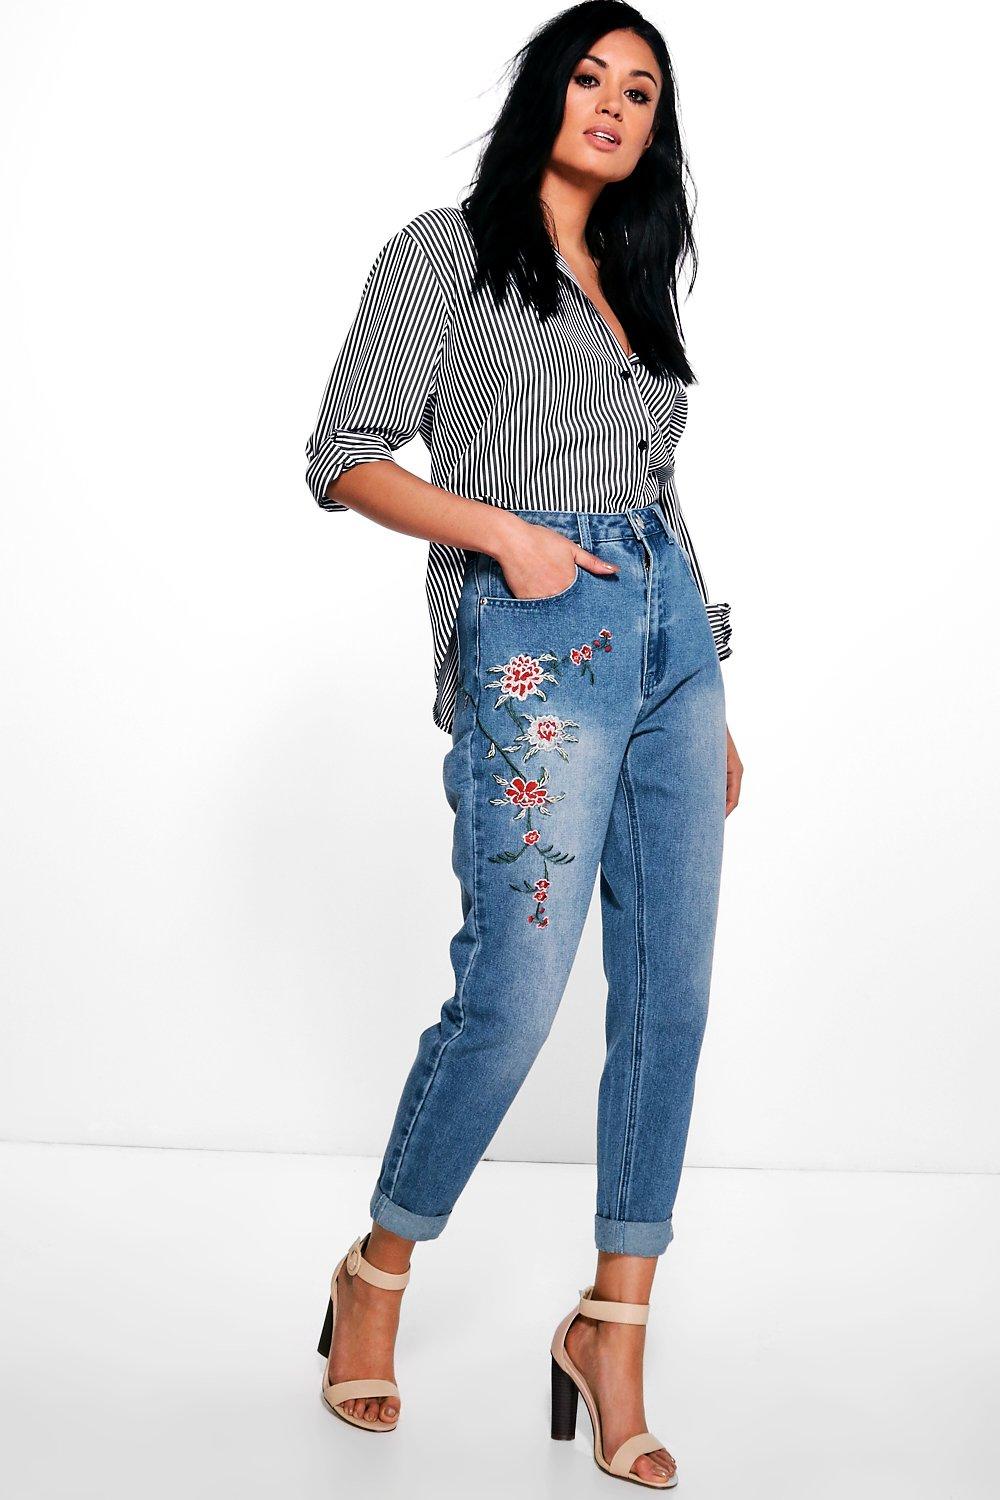 embroidered mom jeans